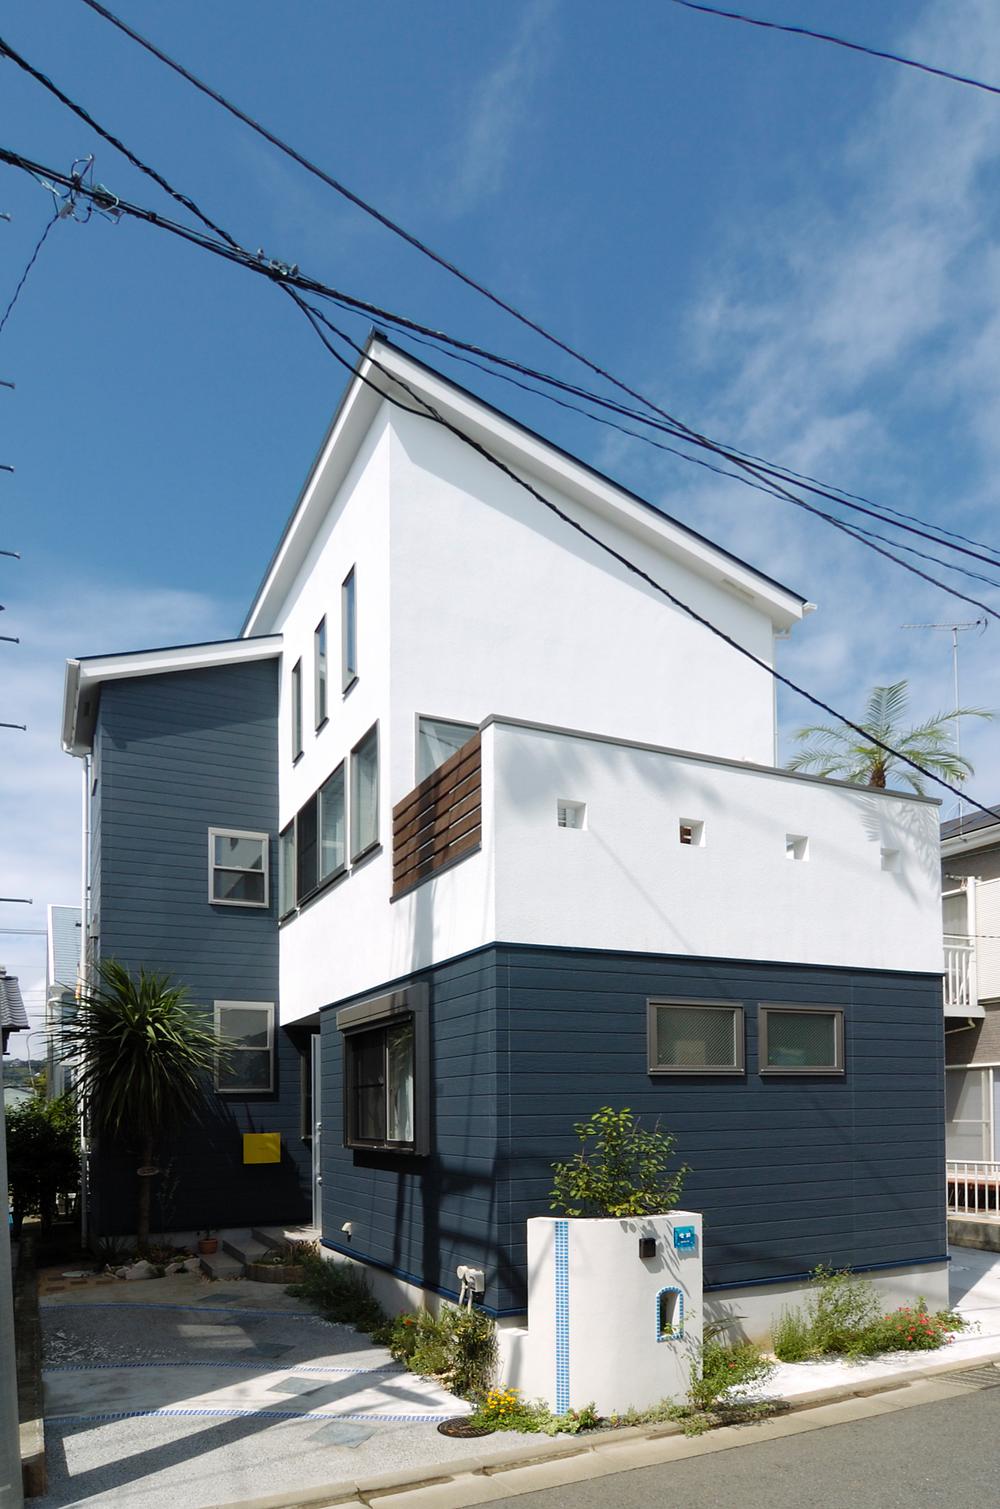 Building plan example (exterior photos). It fits well in the blue sky of Shonan but simple appearance. Our construction cases